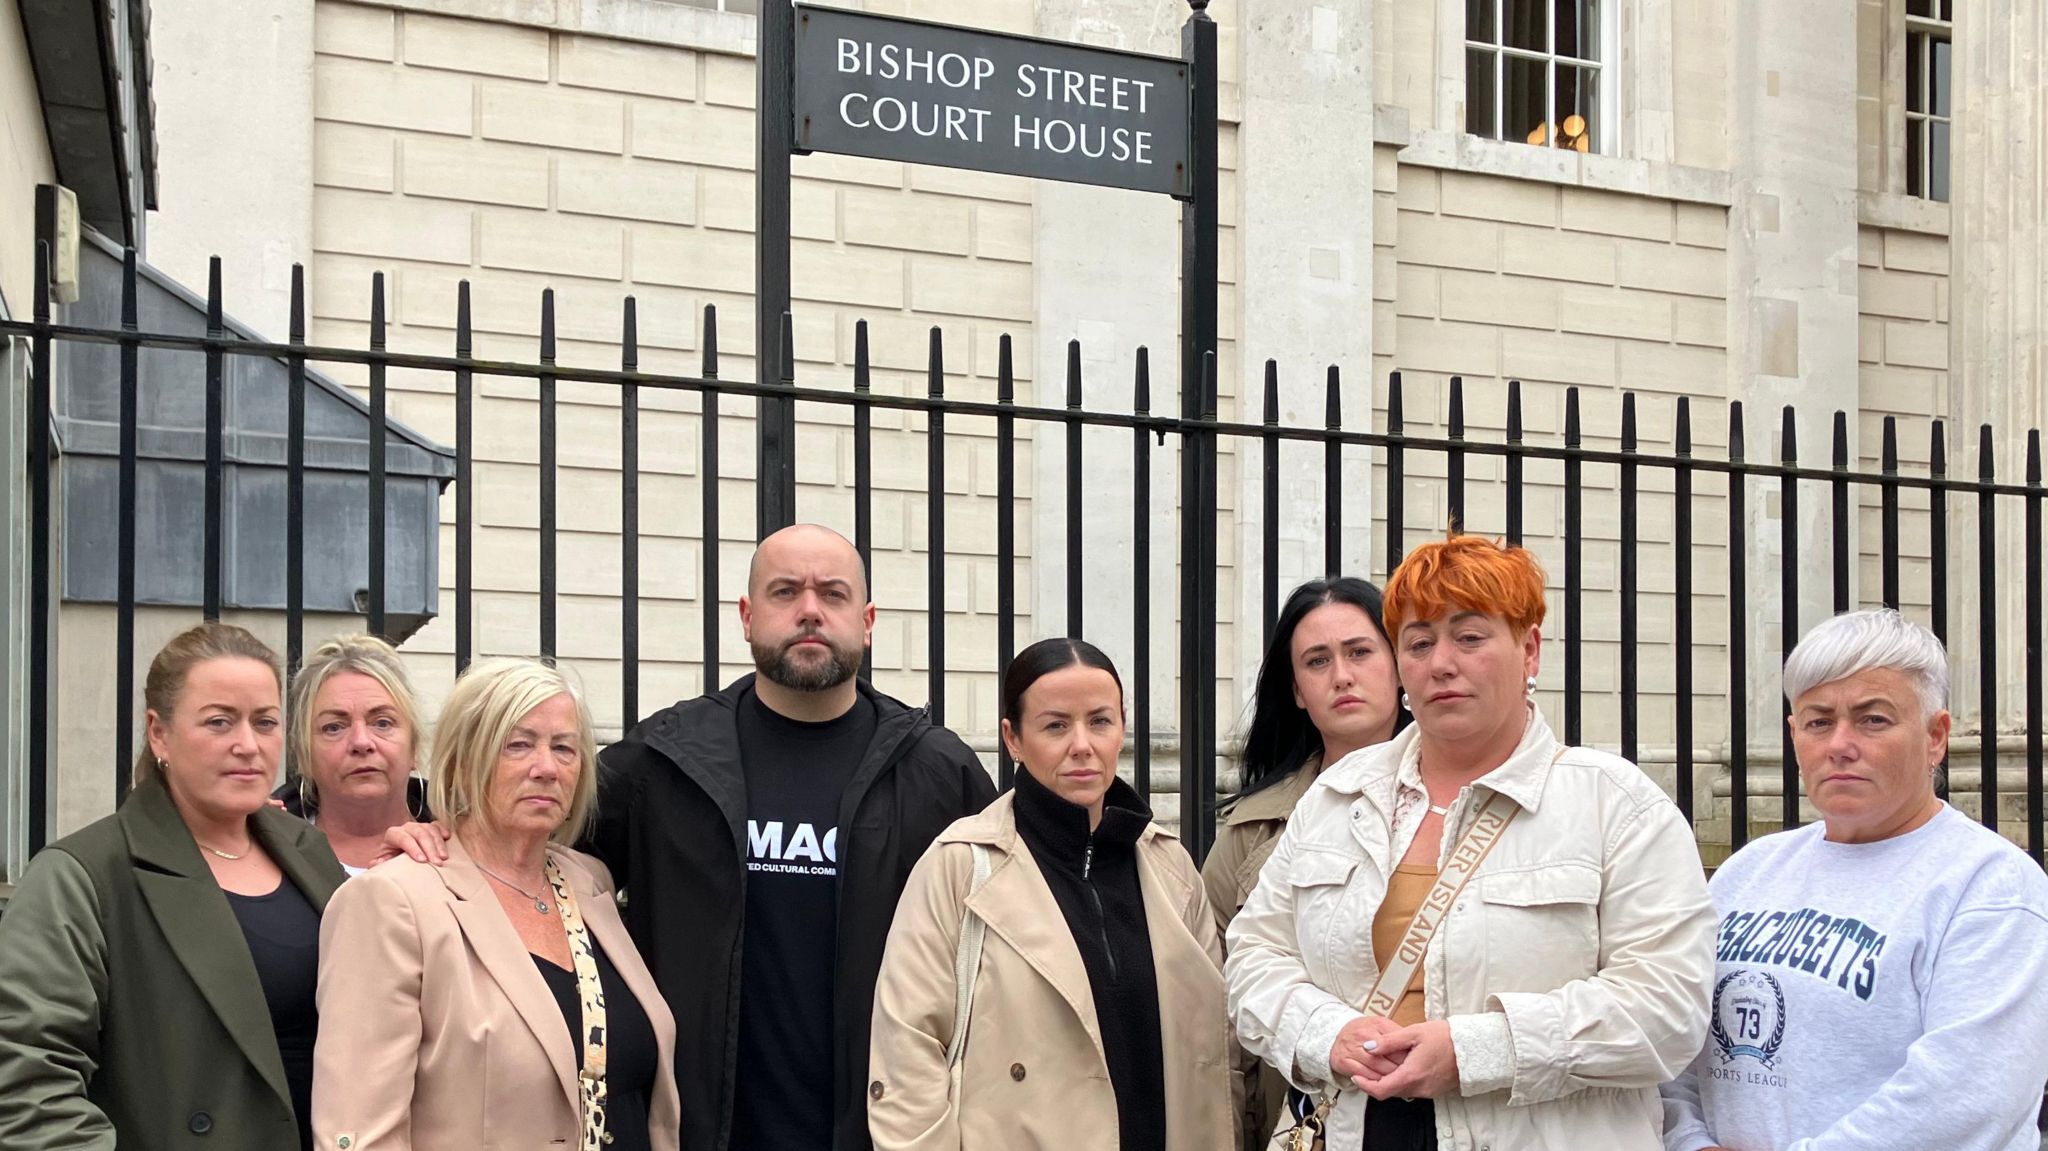 Leanne McLaughlin, the mother of Caitlin, pictured with seven other family members. She is to the left of the image, between two other women, and has medium-length short hair. The group, which features one man and seven woman, all have neutral facial expressions and are standing in front of a fence outside Bishop Street Courthouse in Derry.